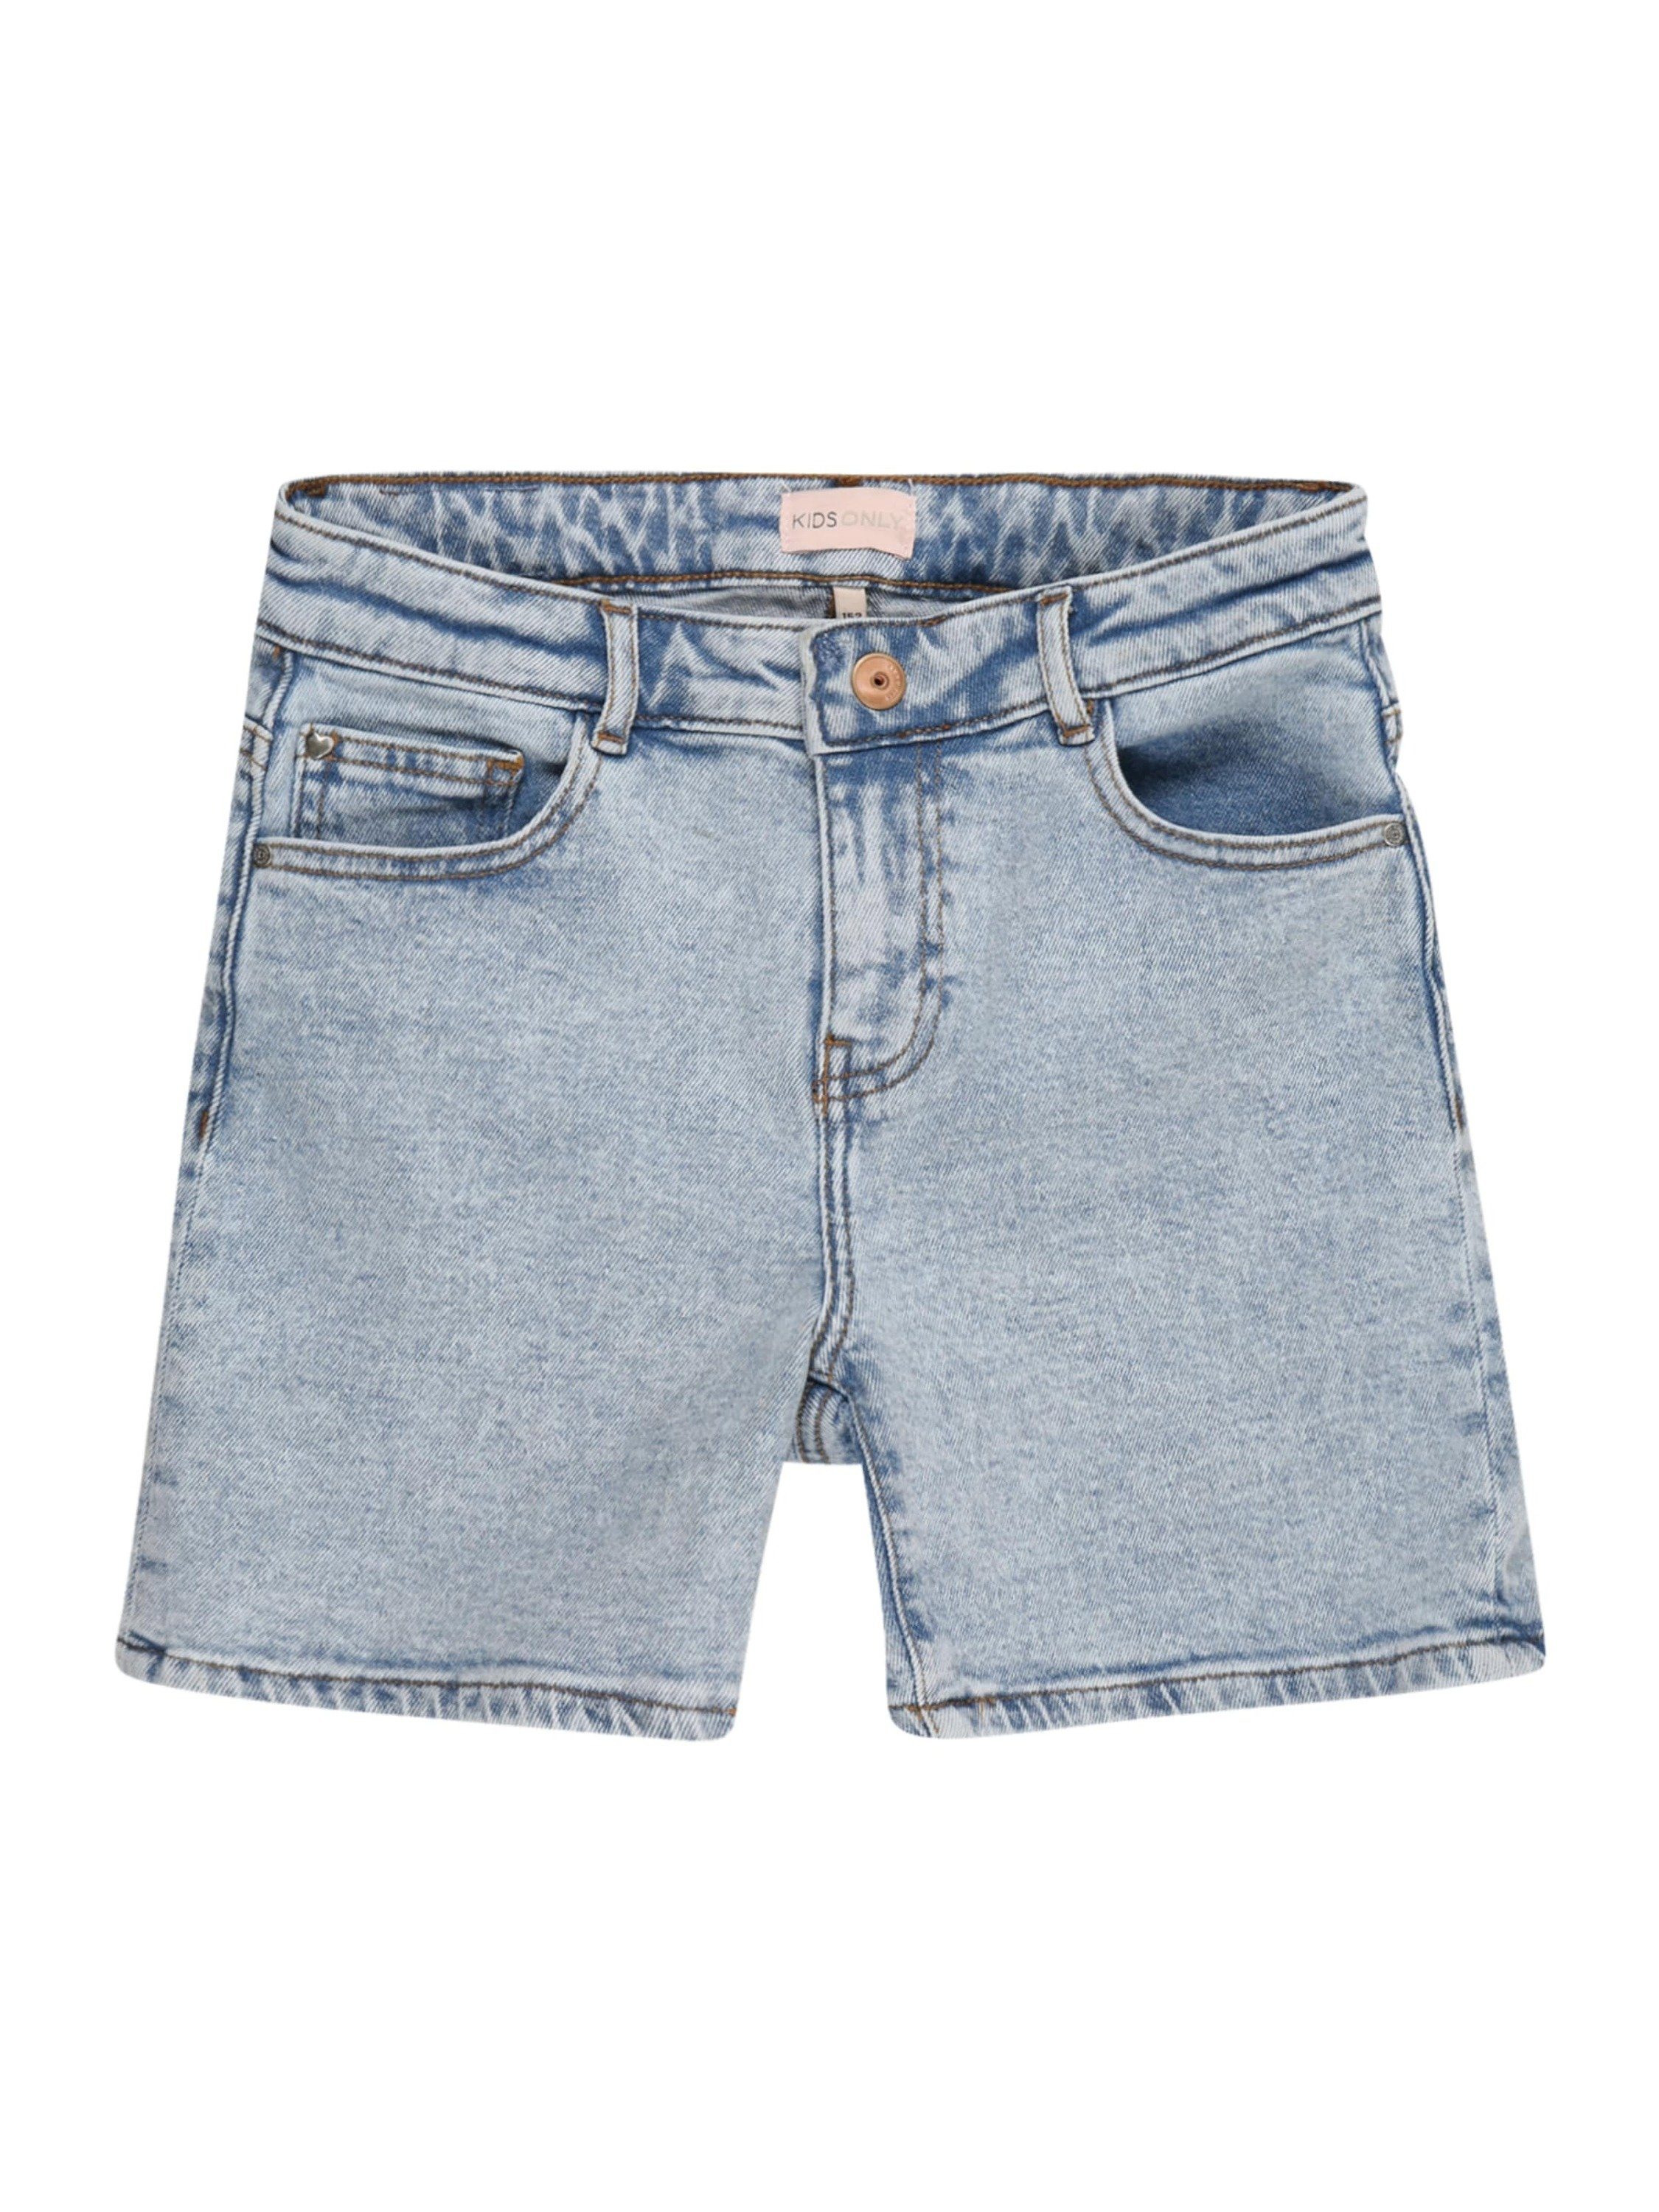 Patch/Label KONPHINE, Label Flag ONLY Jeansshorts KIDS